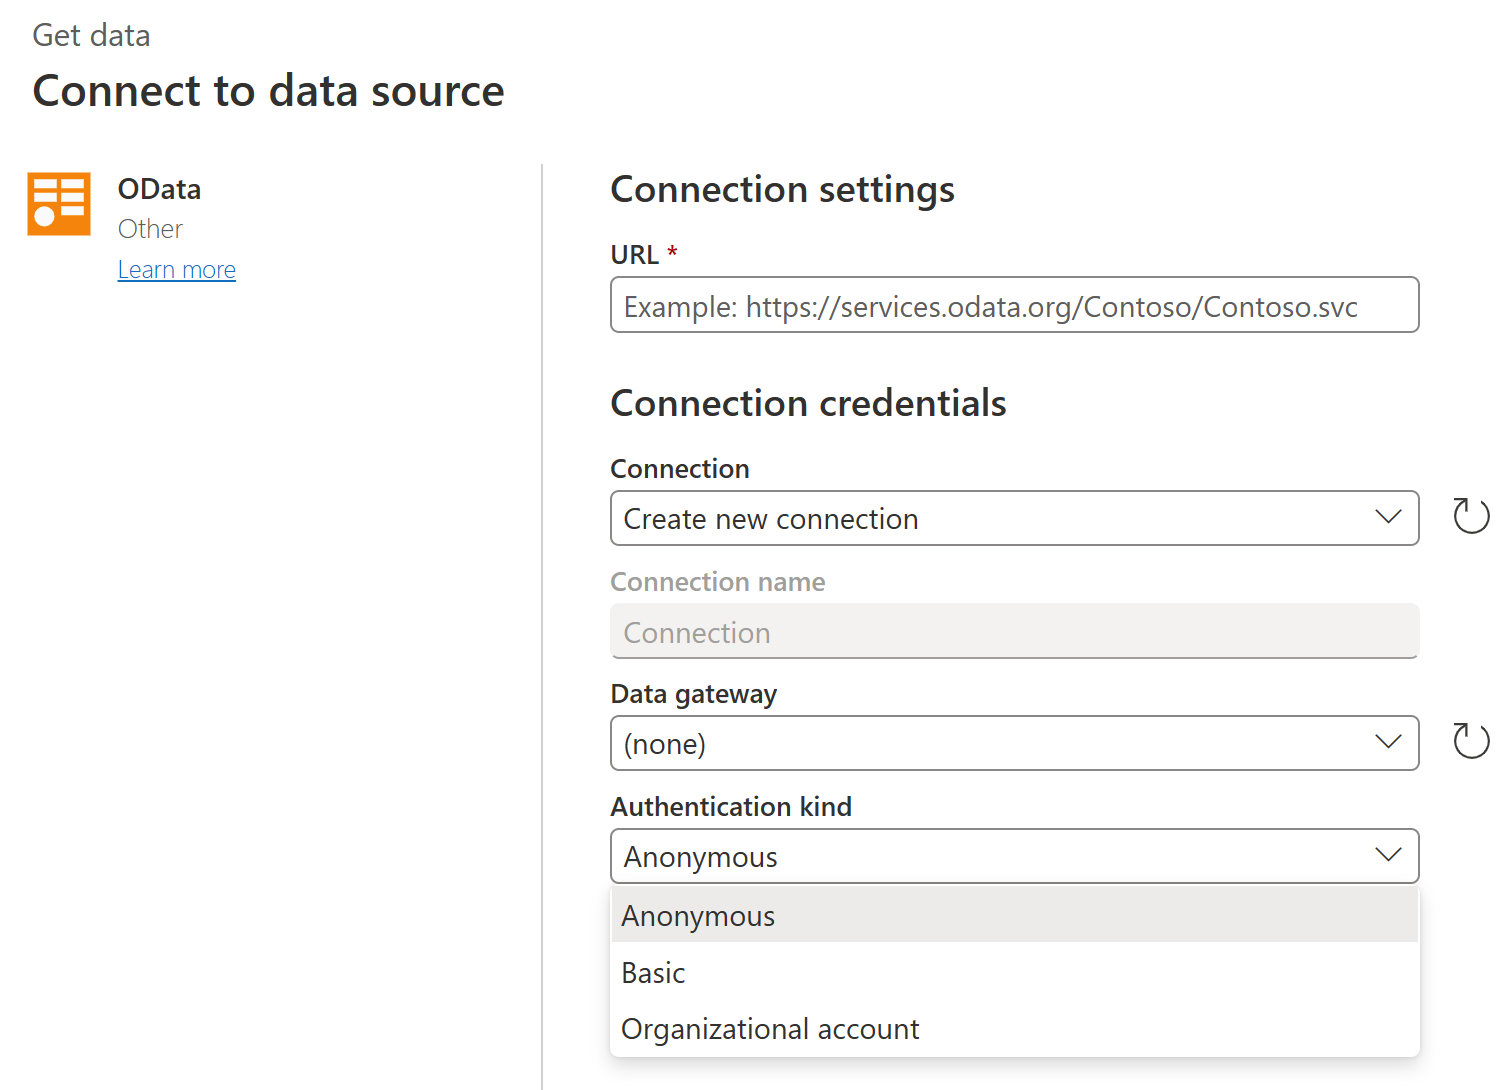 Screenshot of the Connect to data source windows for the OData connector in Power Query Online.